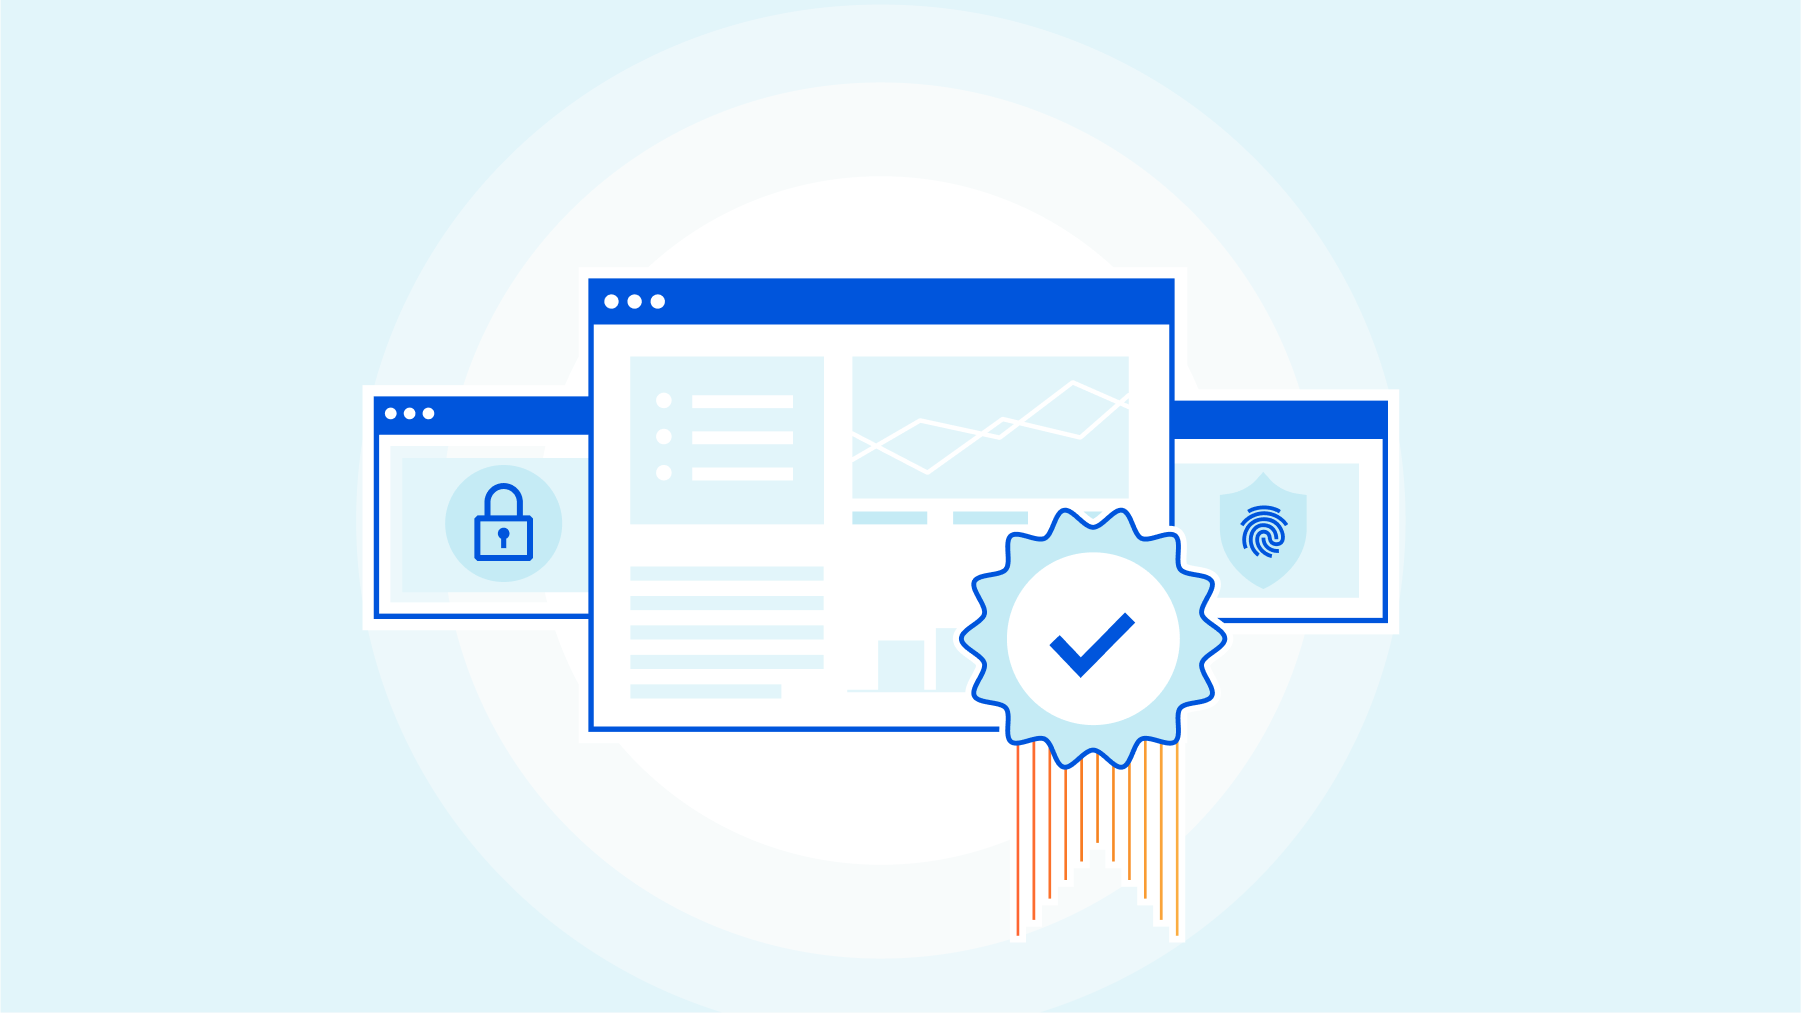 Bring your own CA for client certificate validation with API Shield